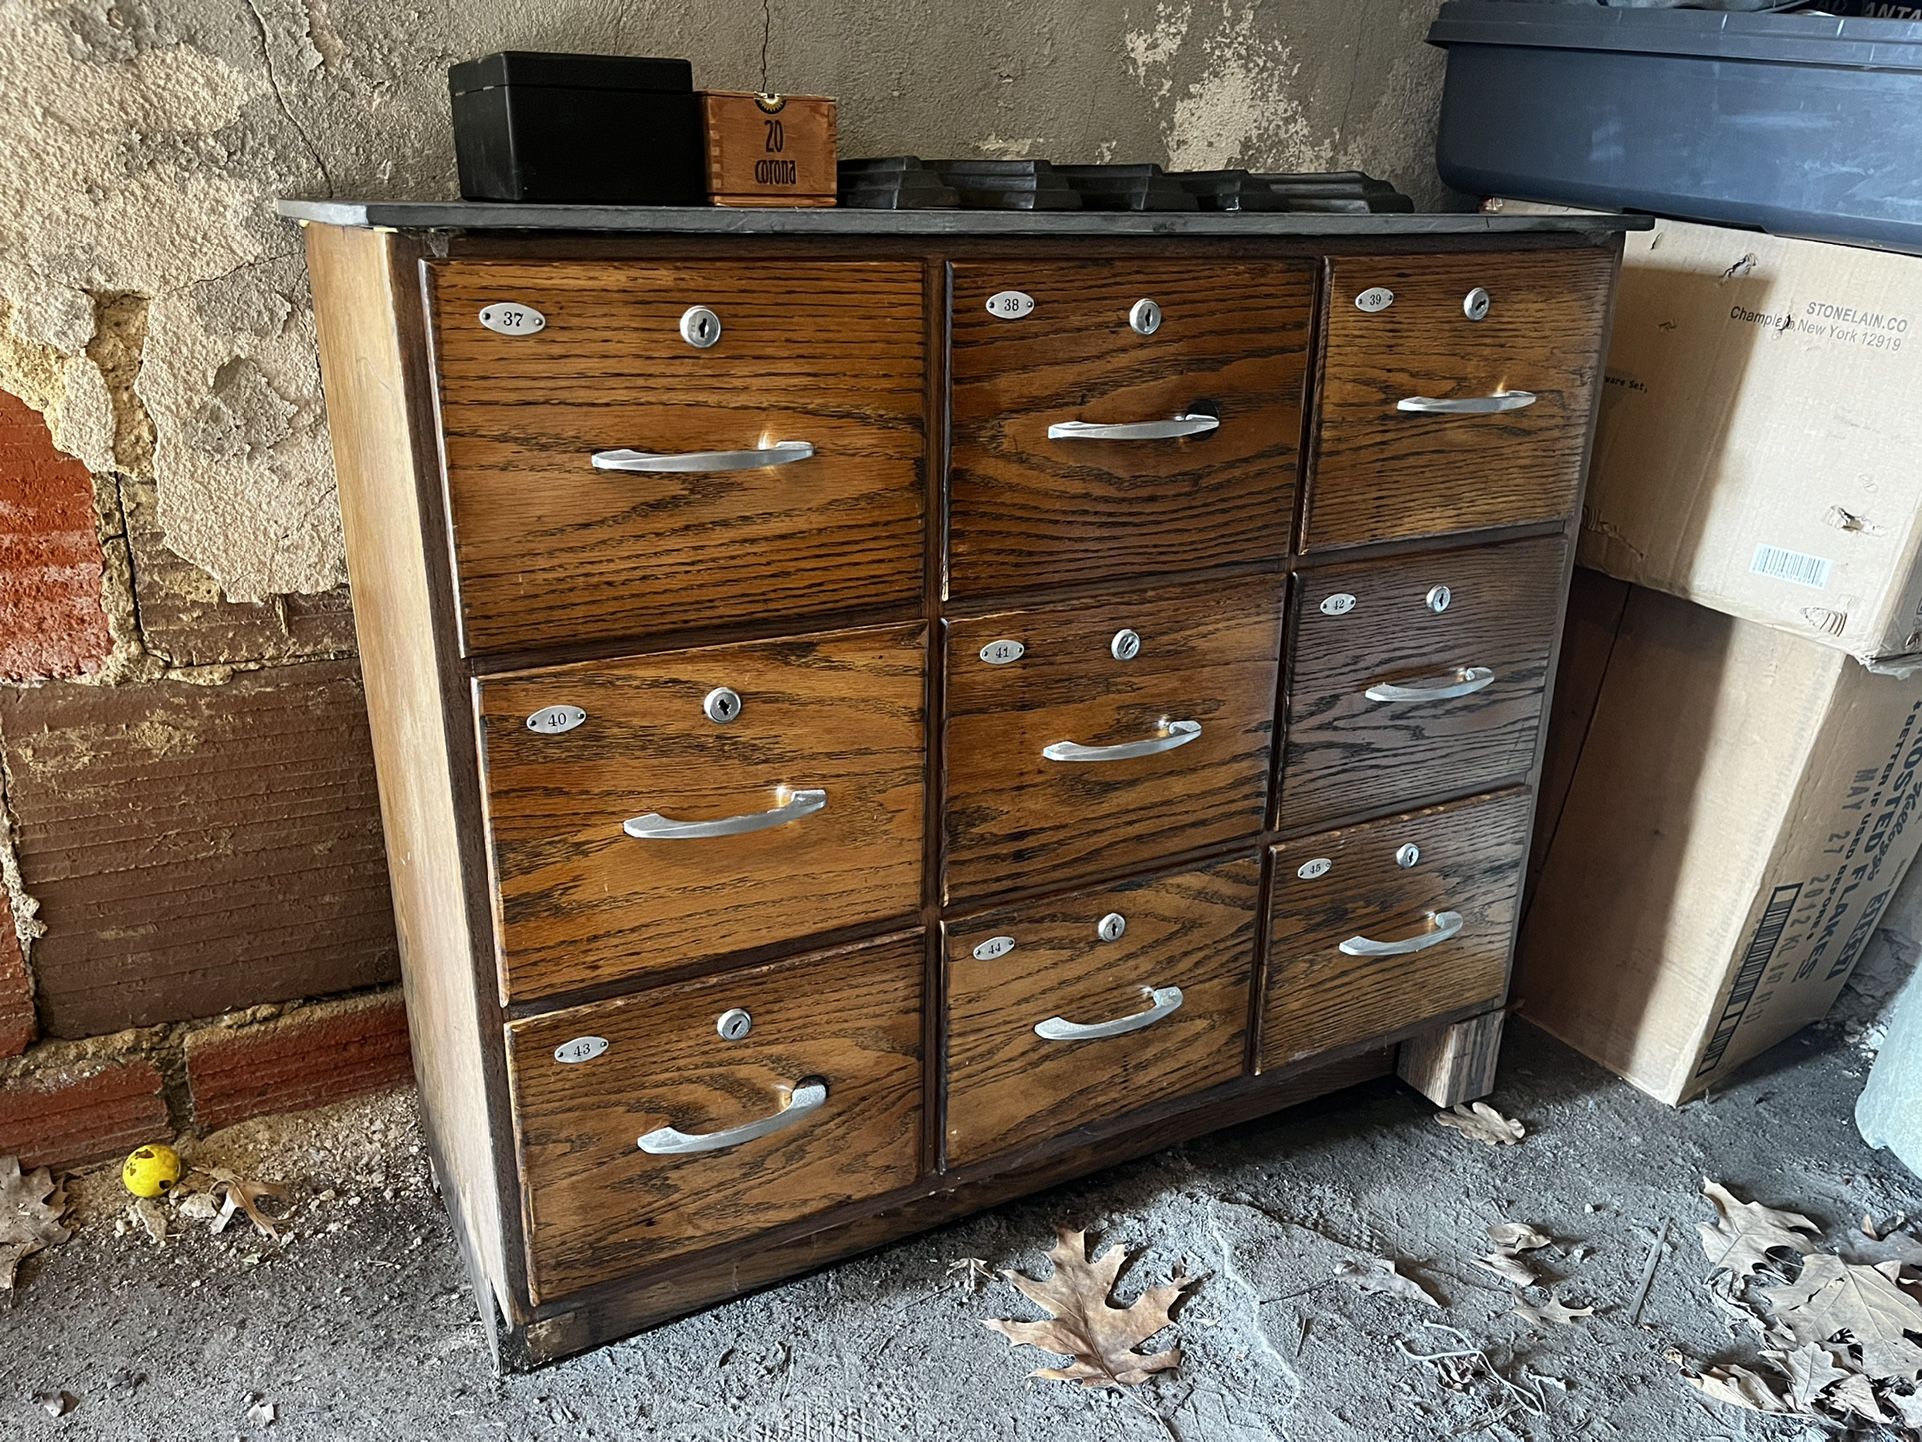 Antique Medical Apothecary Cabinet - This Weekend - Final Markdown!